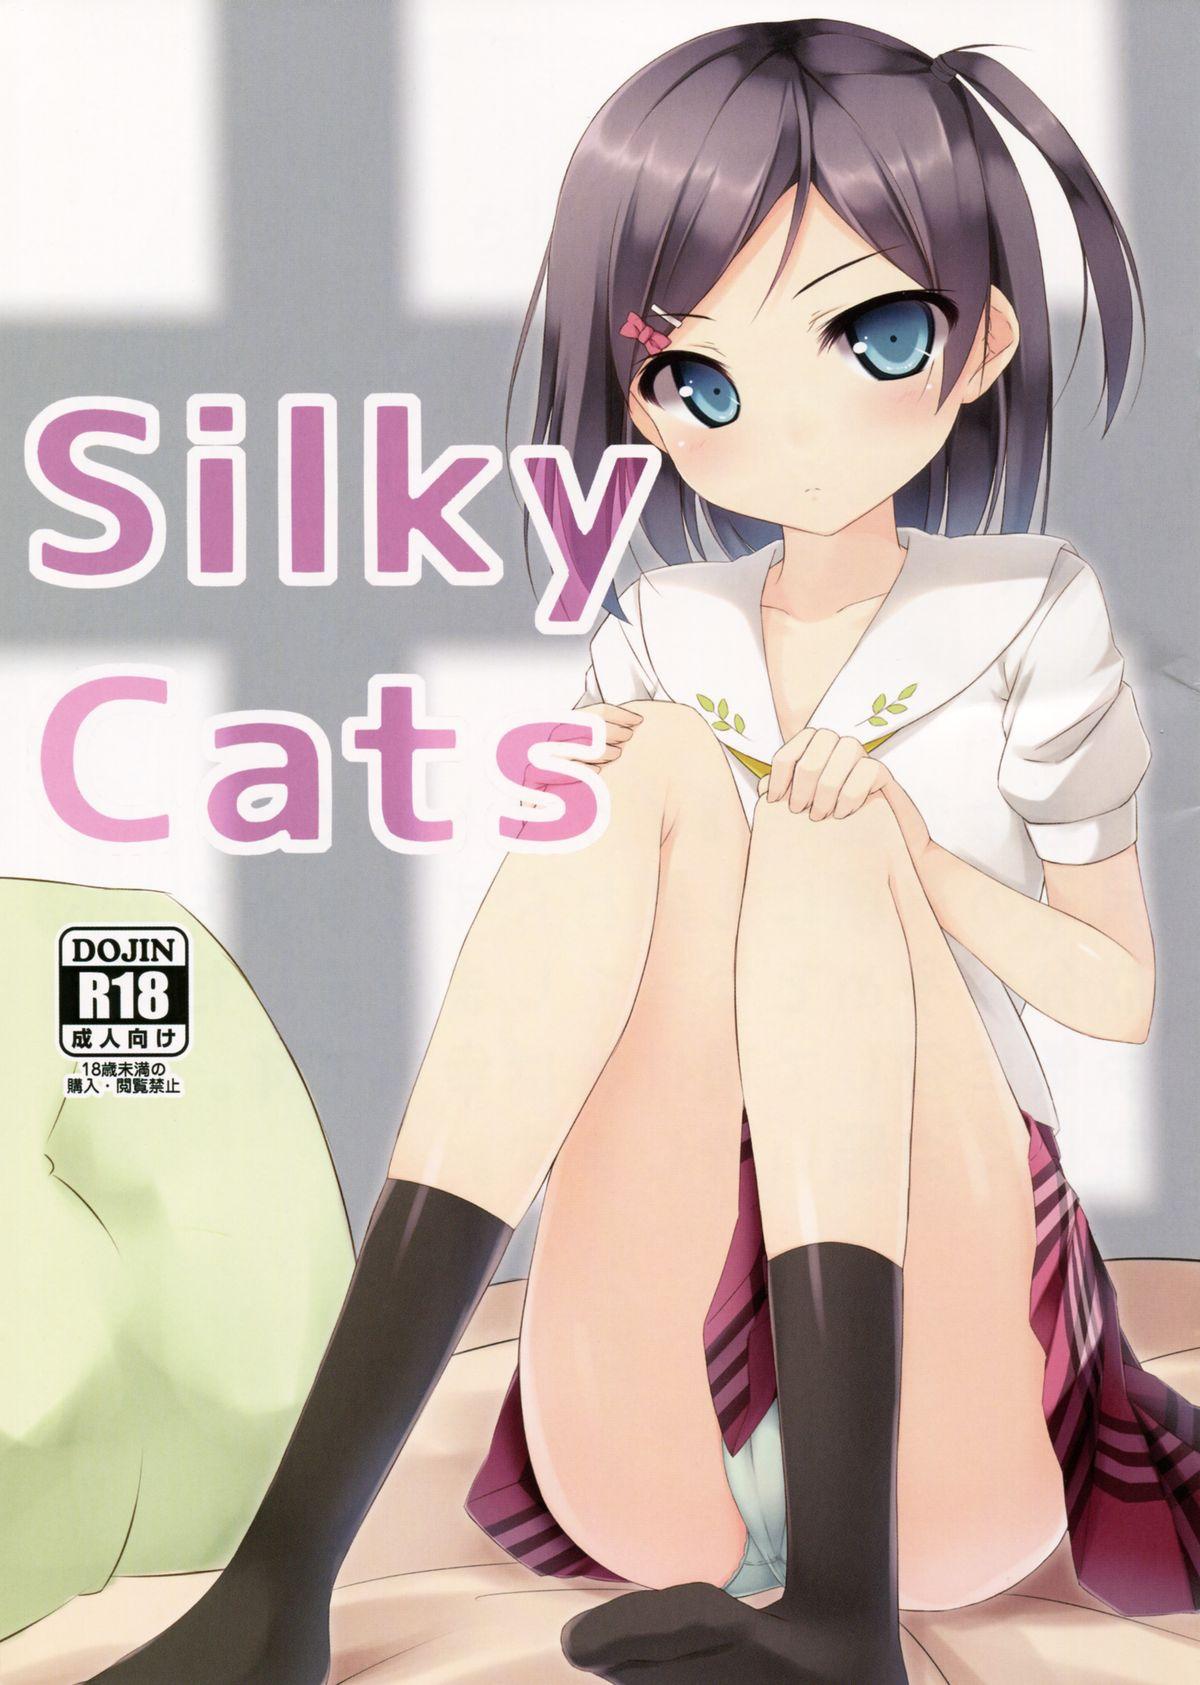 Silky Cats 0